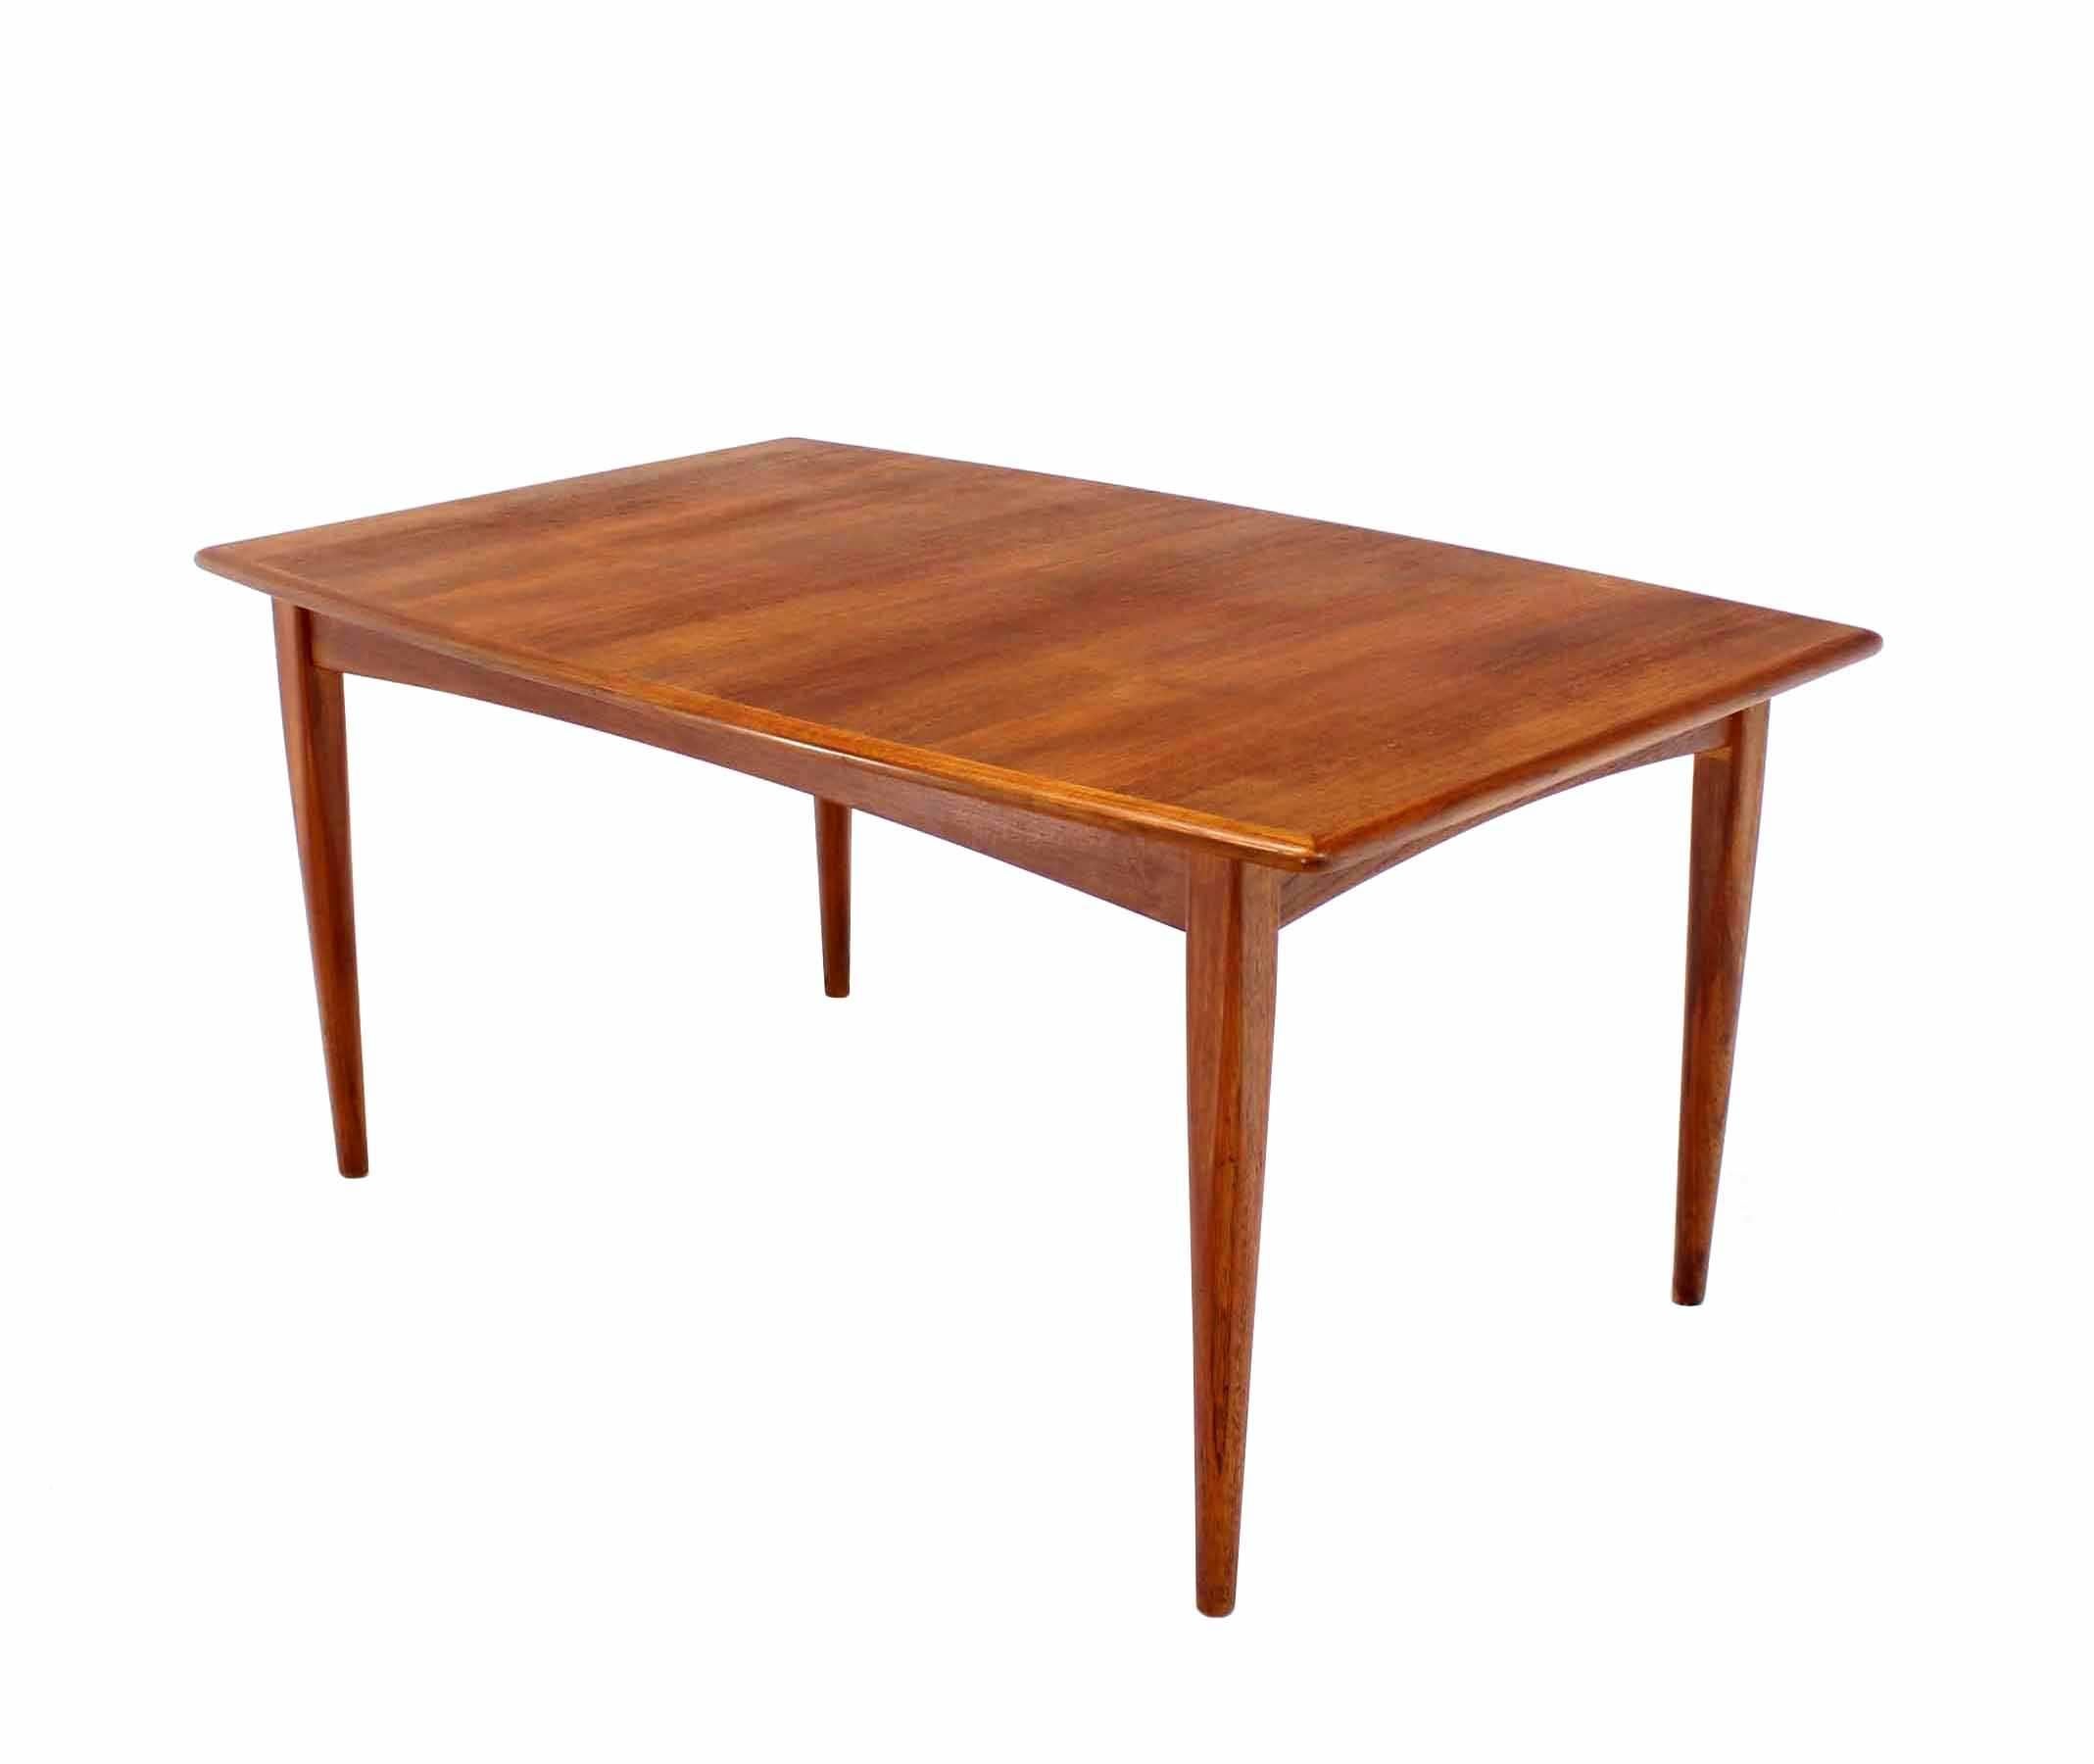 Mid-Century Modern Danish Modern Teak Boat Shape Dining Table with Two Pop-Up Leafs Extension Board For Sale